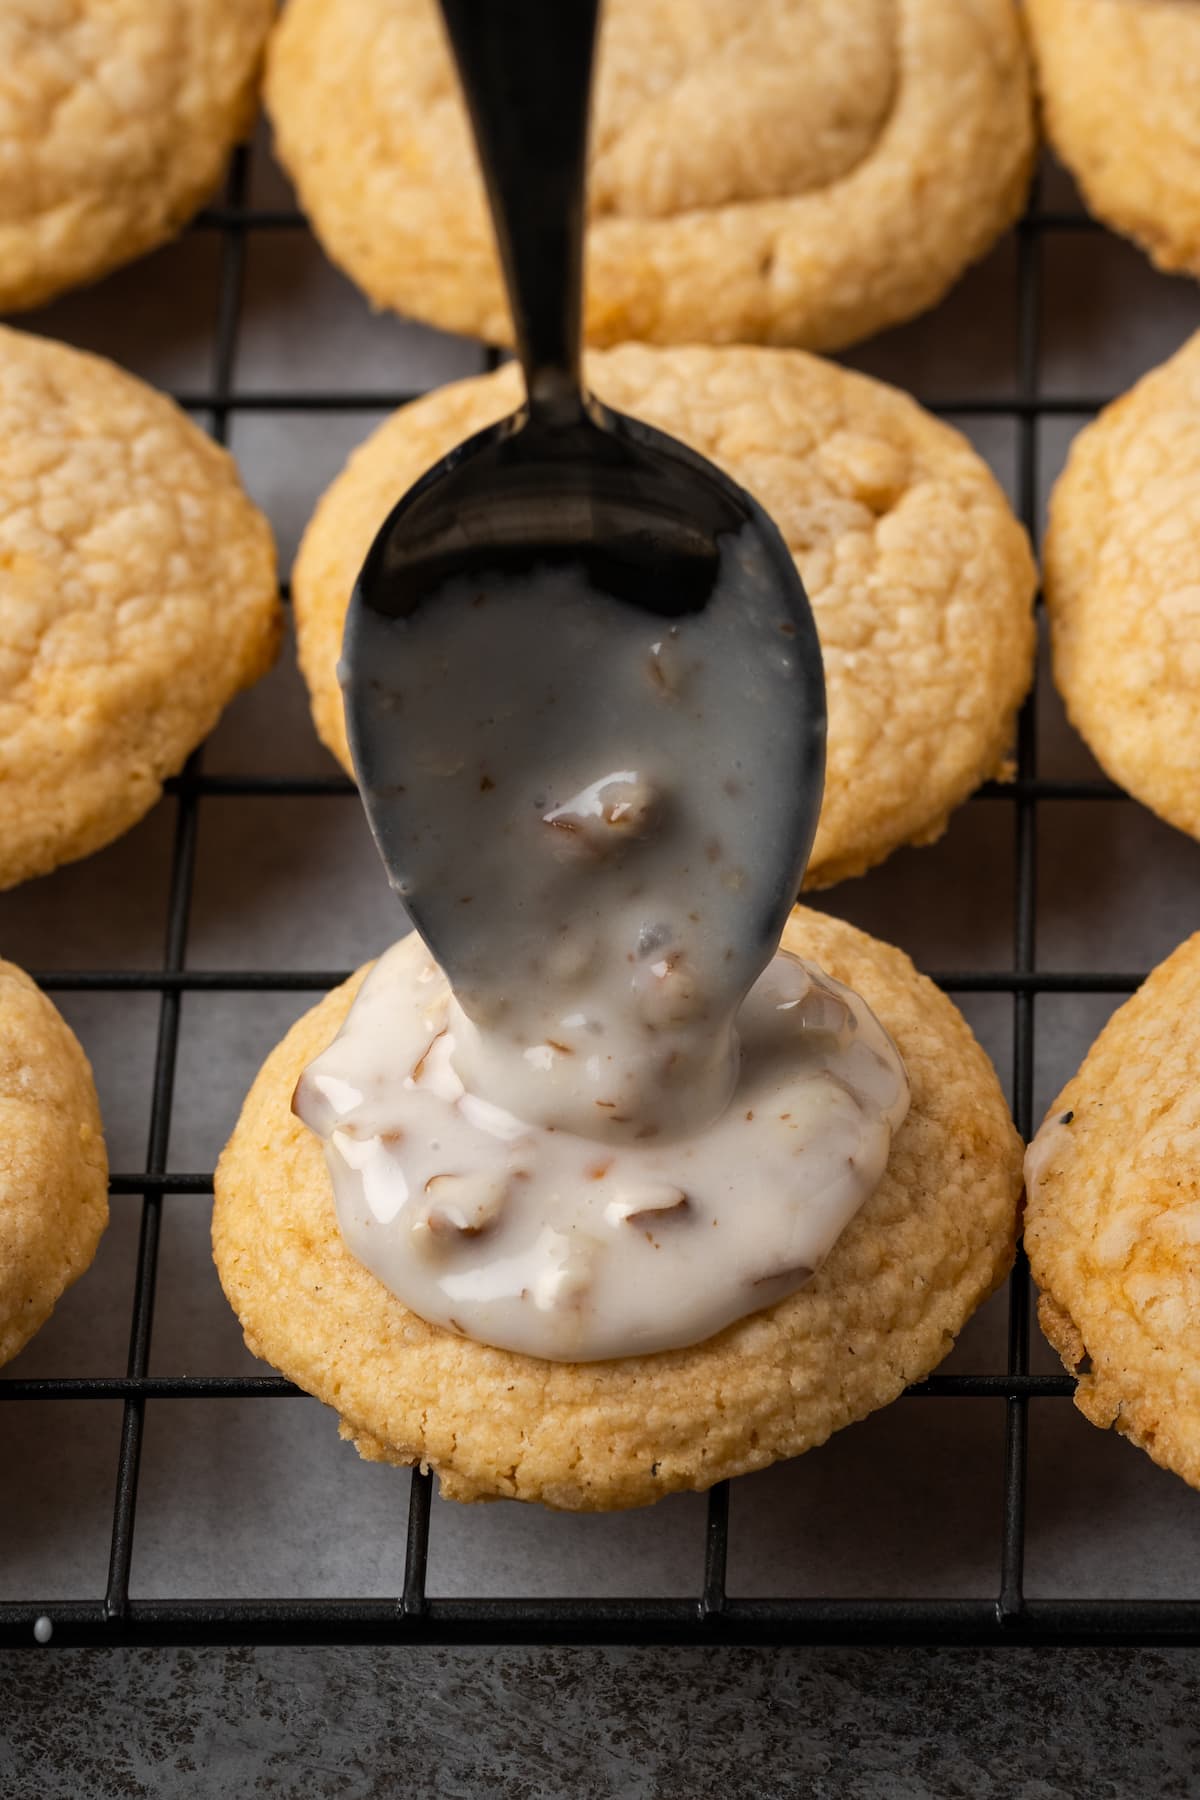 A spoon drops glaze on top of a butter pecan cookie on a wire rack.